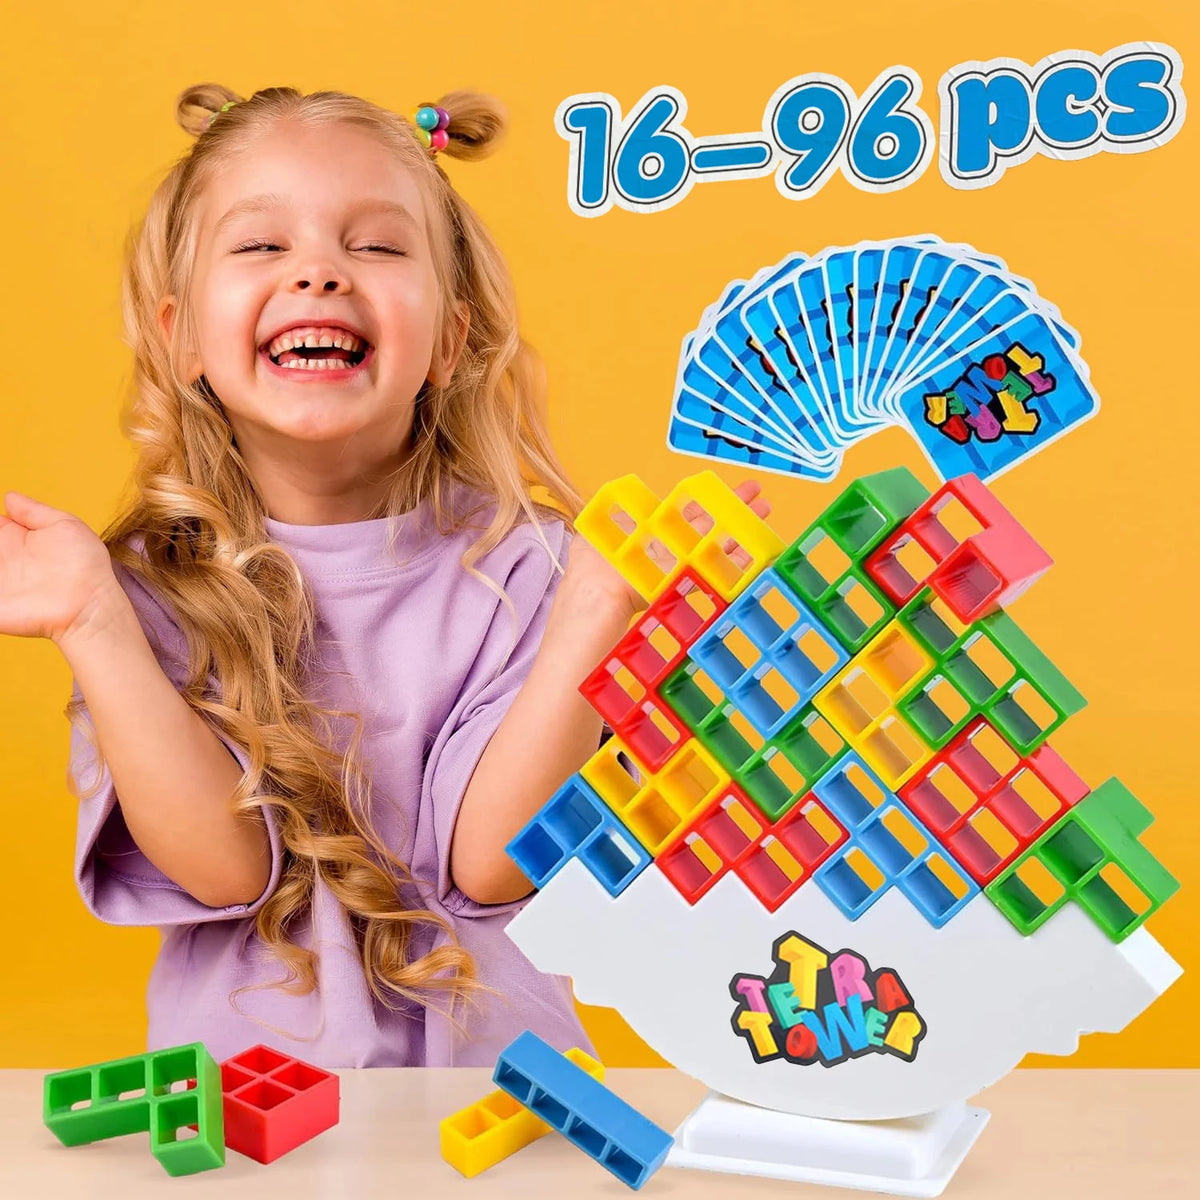 48 Tetra Tower Game Balance Tower Puzzle Board Game Kids